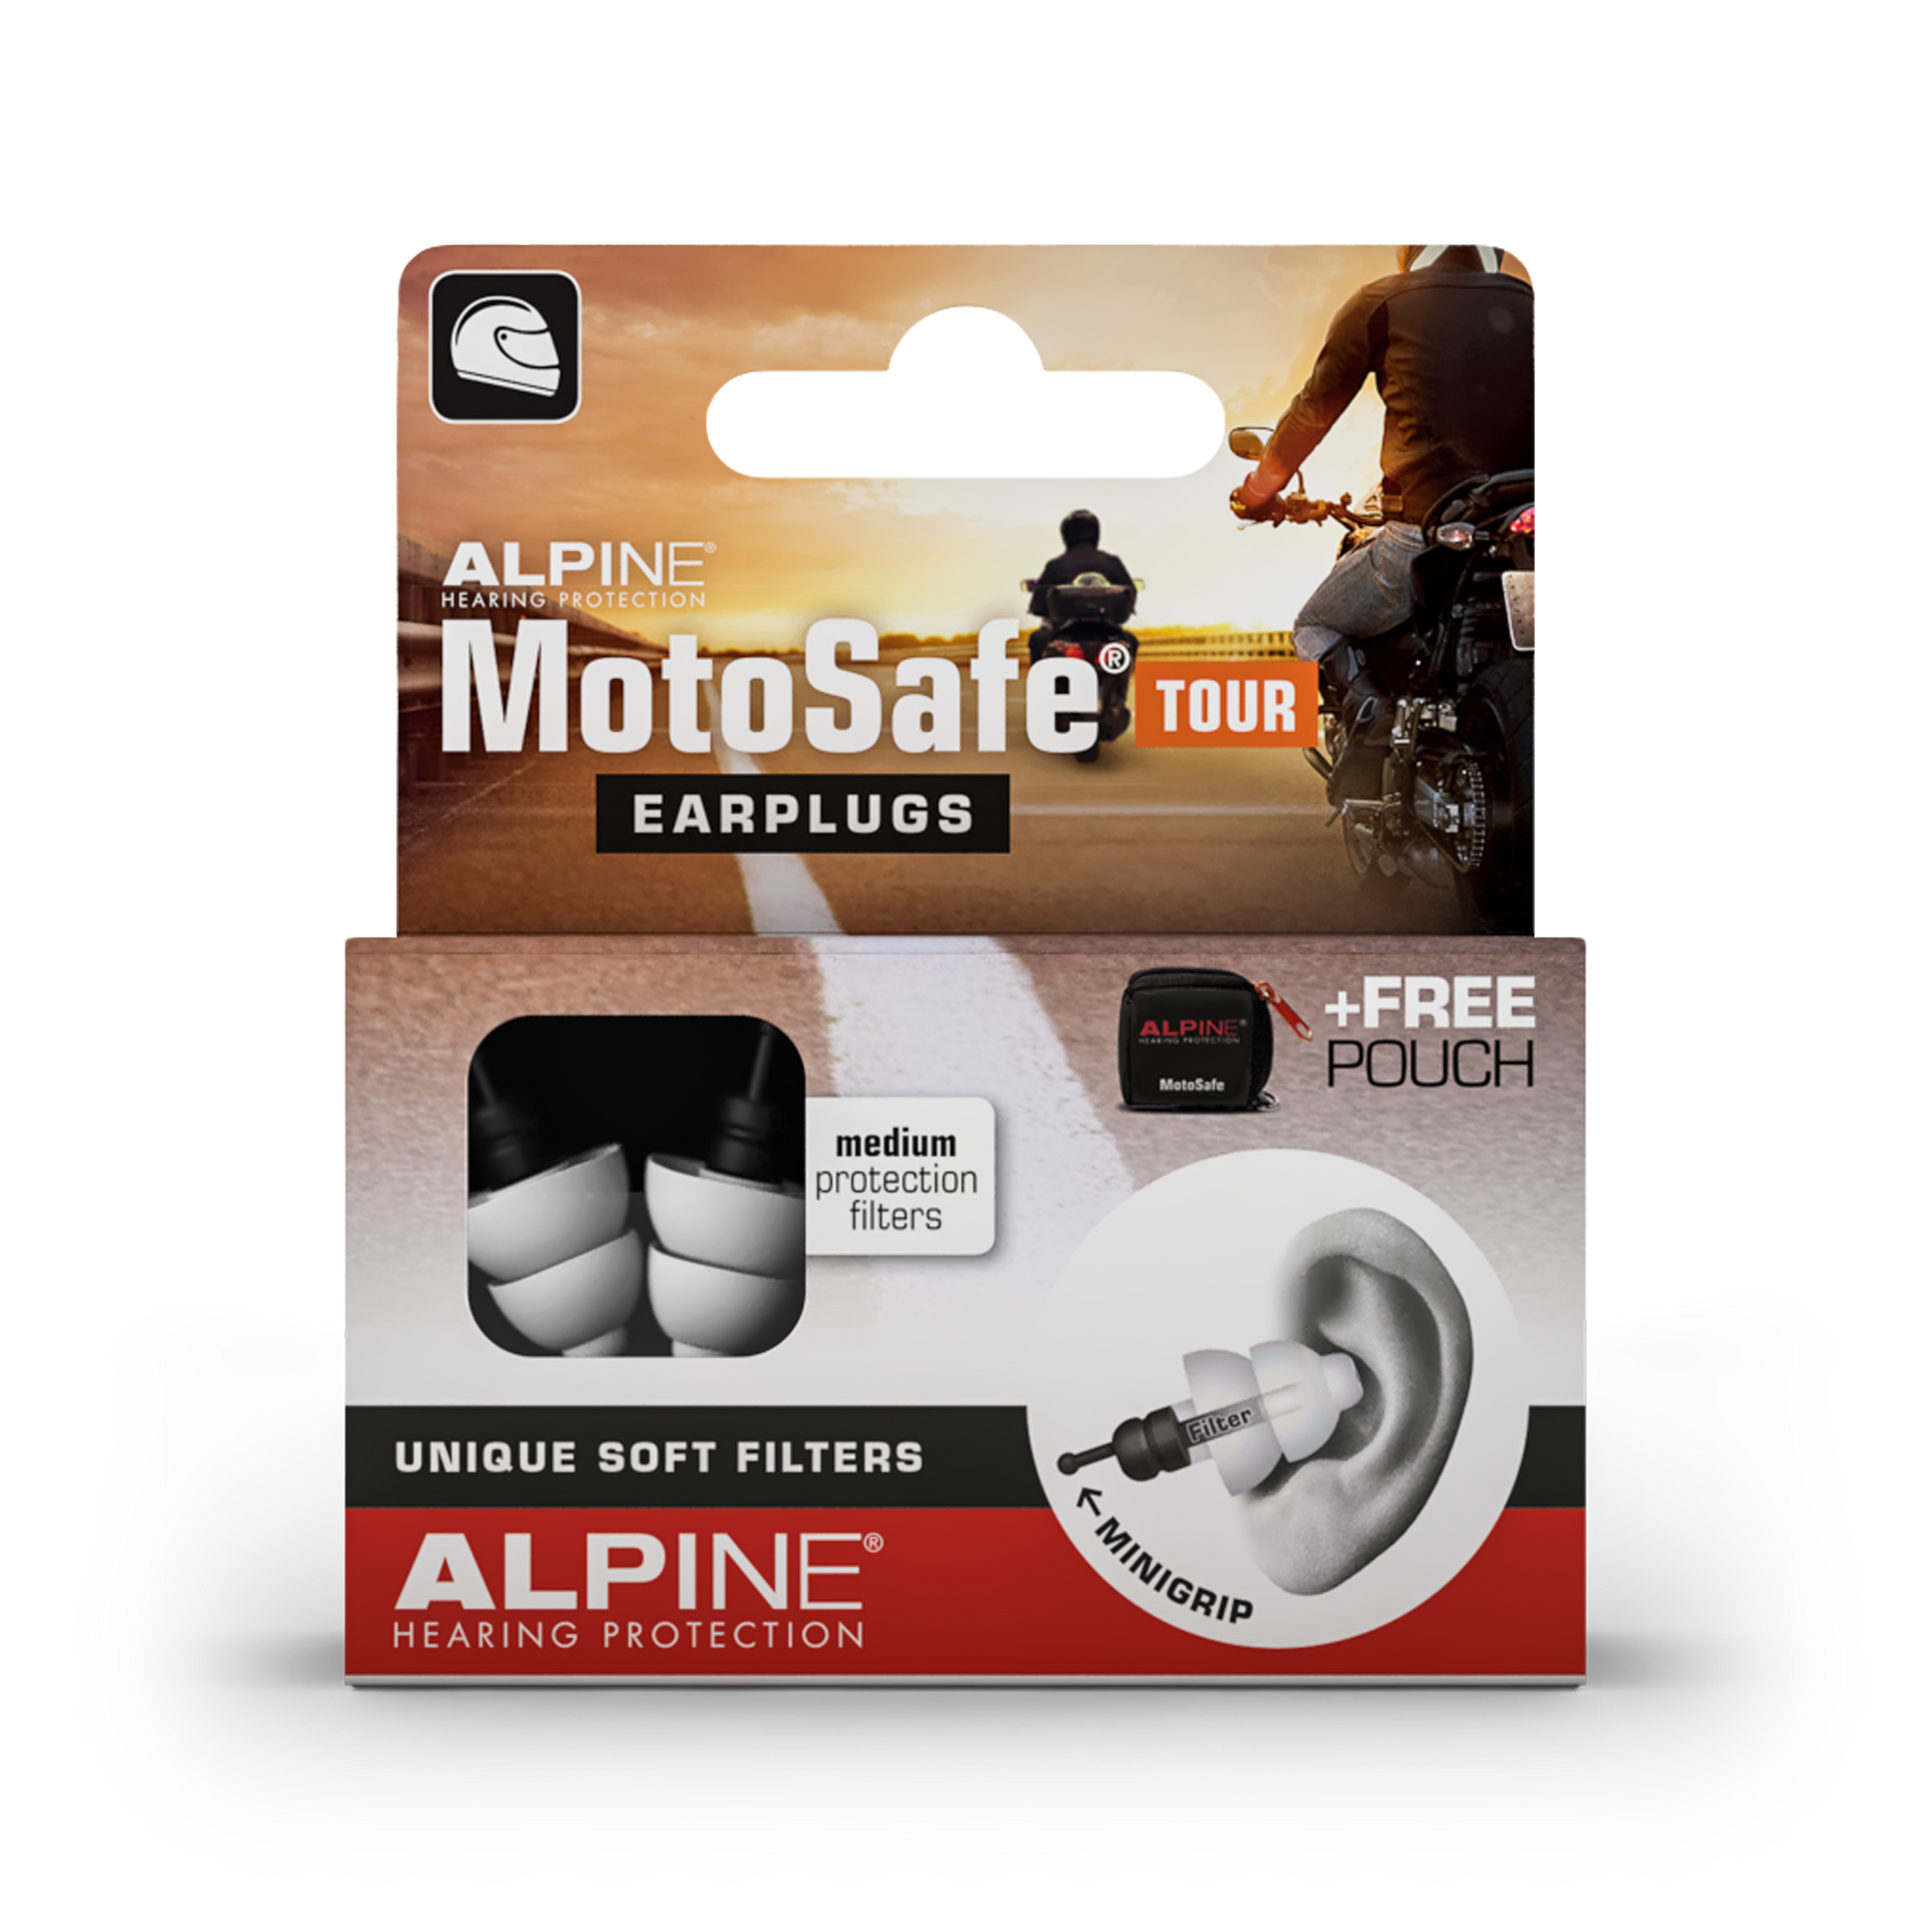 Alpine MotoSafe Tour earplugs for motorcycle Alpine hearing protection Earplugs earmuffs protect your ear red dot award Cleaning Spray Cord for earplugs Deluxe Pouch Ear Spray Miniboxx Sleeping Mask Travel pouch Travelbox Deluxe cleaning 